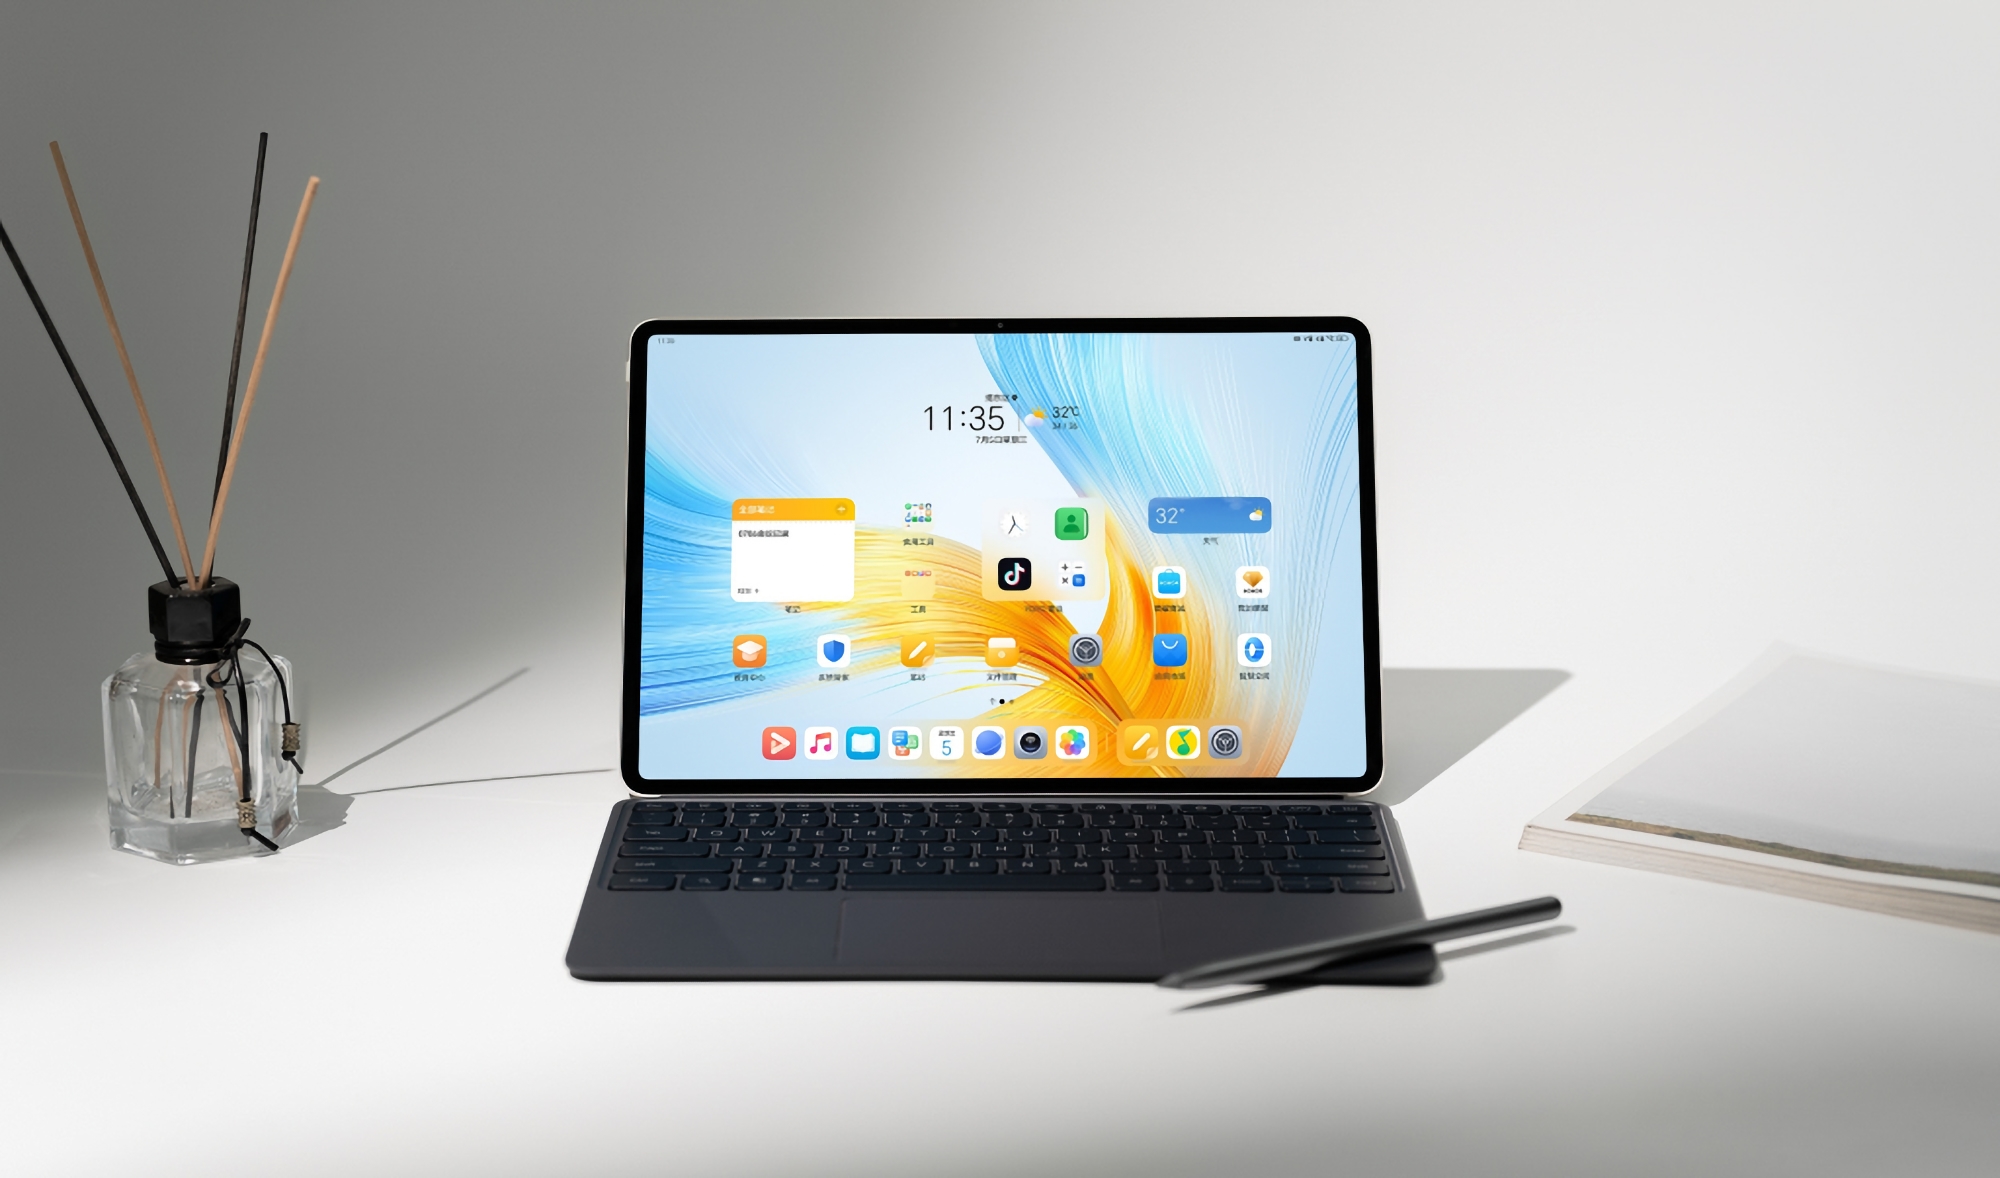 Two cameras, slim bezel display, stylus and keyboard case: Honor reveals the MagicPad before the announcement